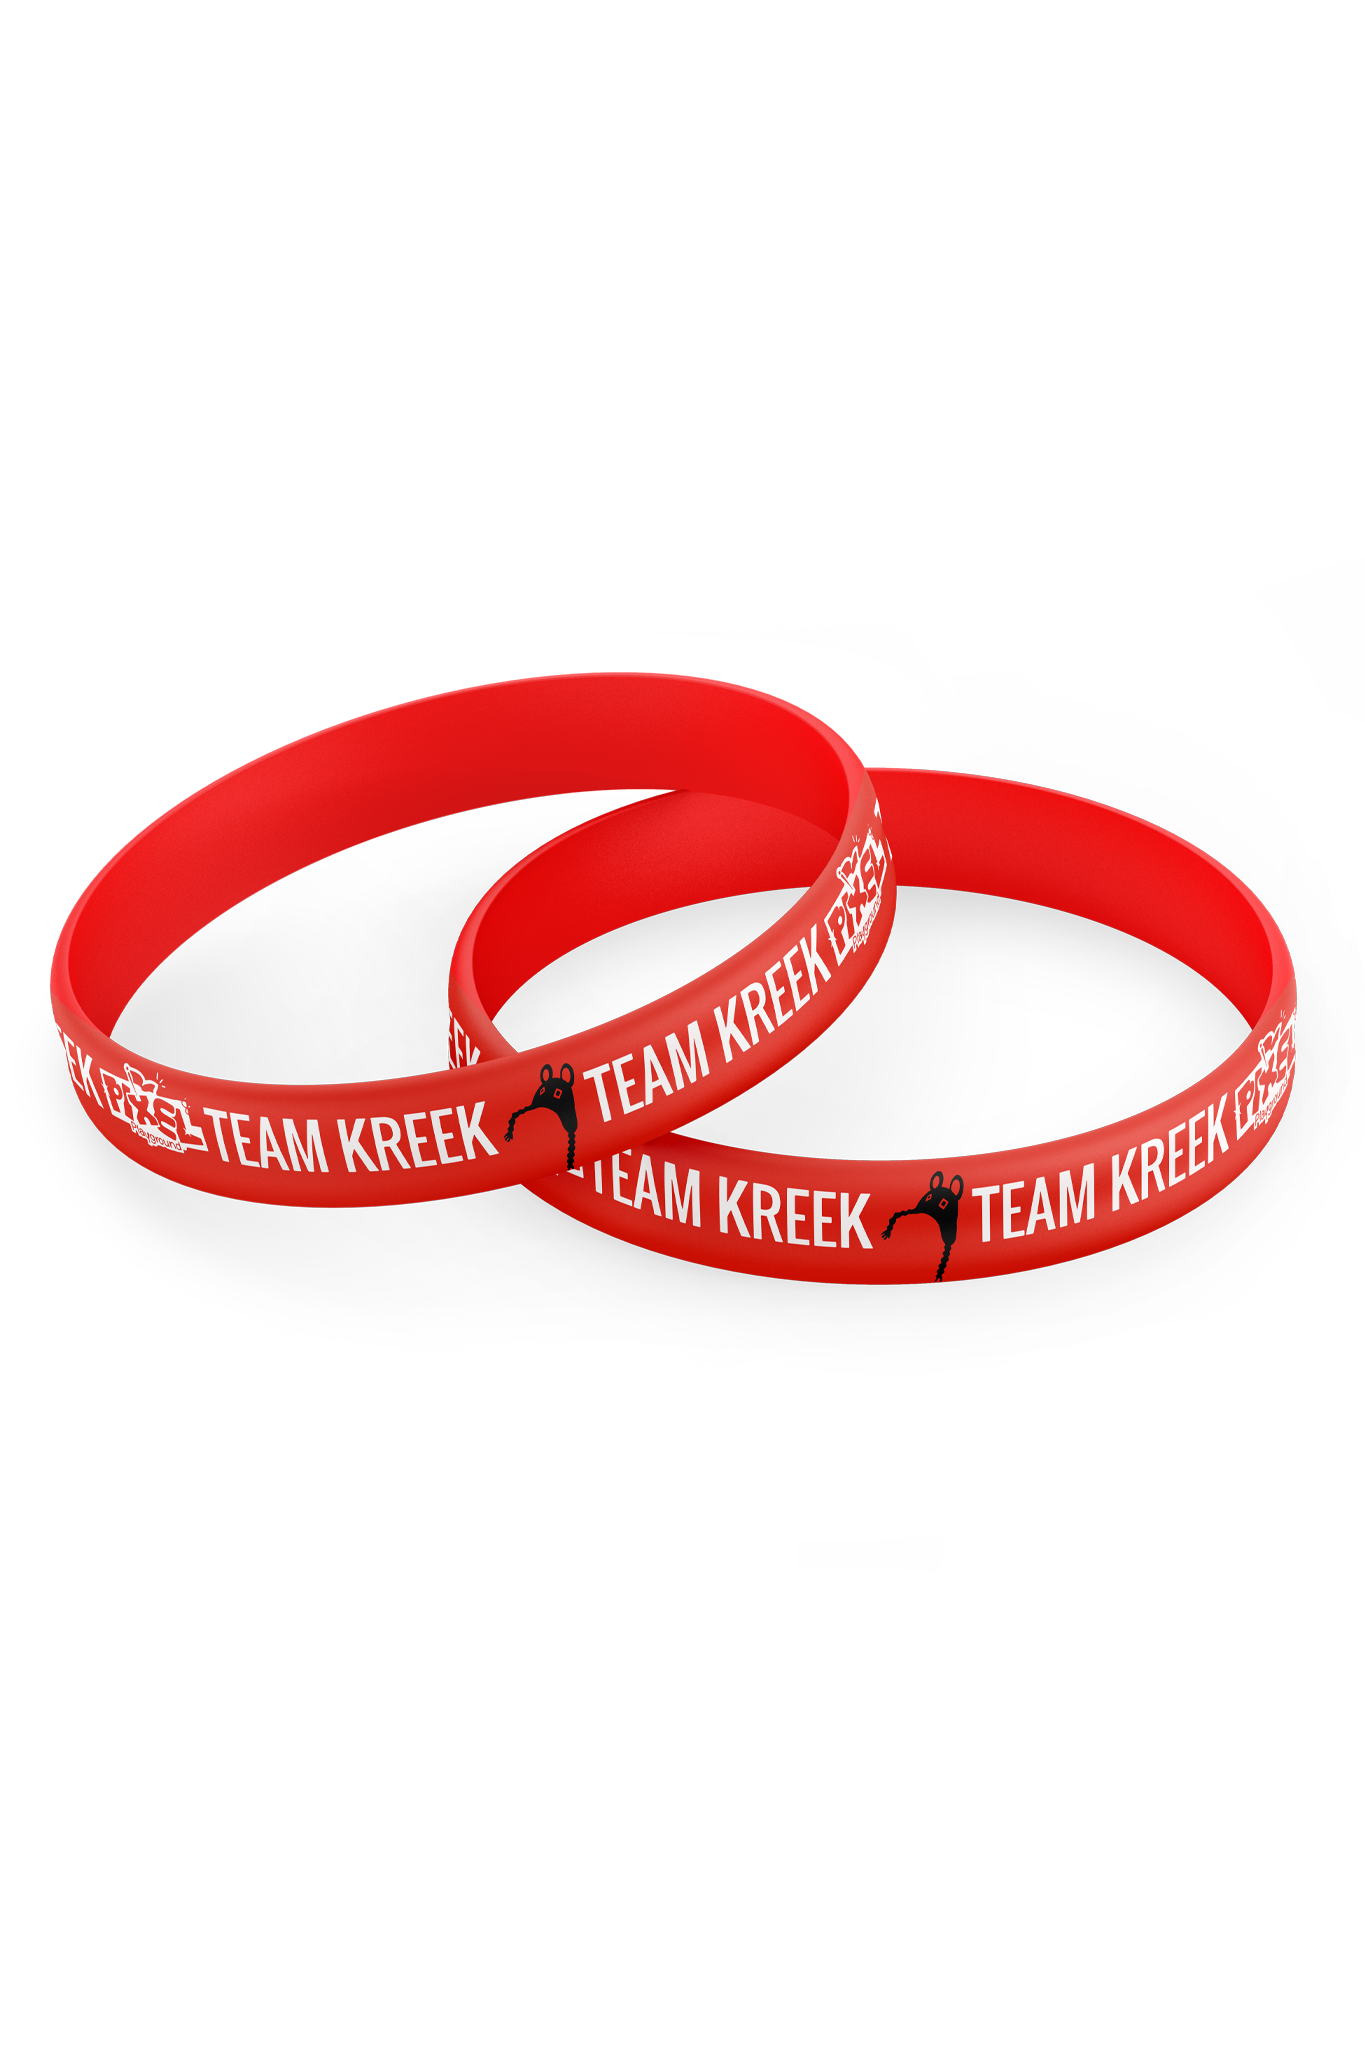 Red wristband with 'TEAM KREEK' text and Pixel Playground logo.